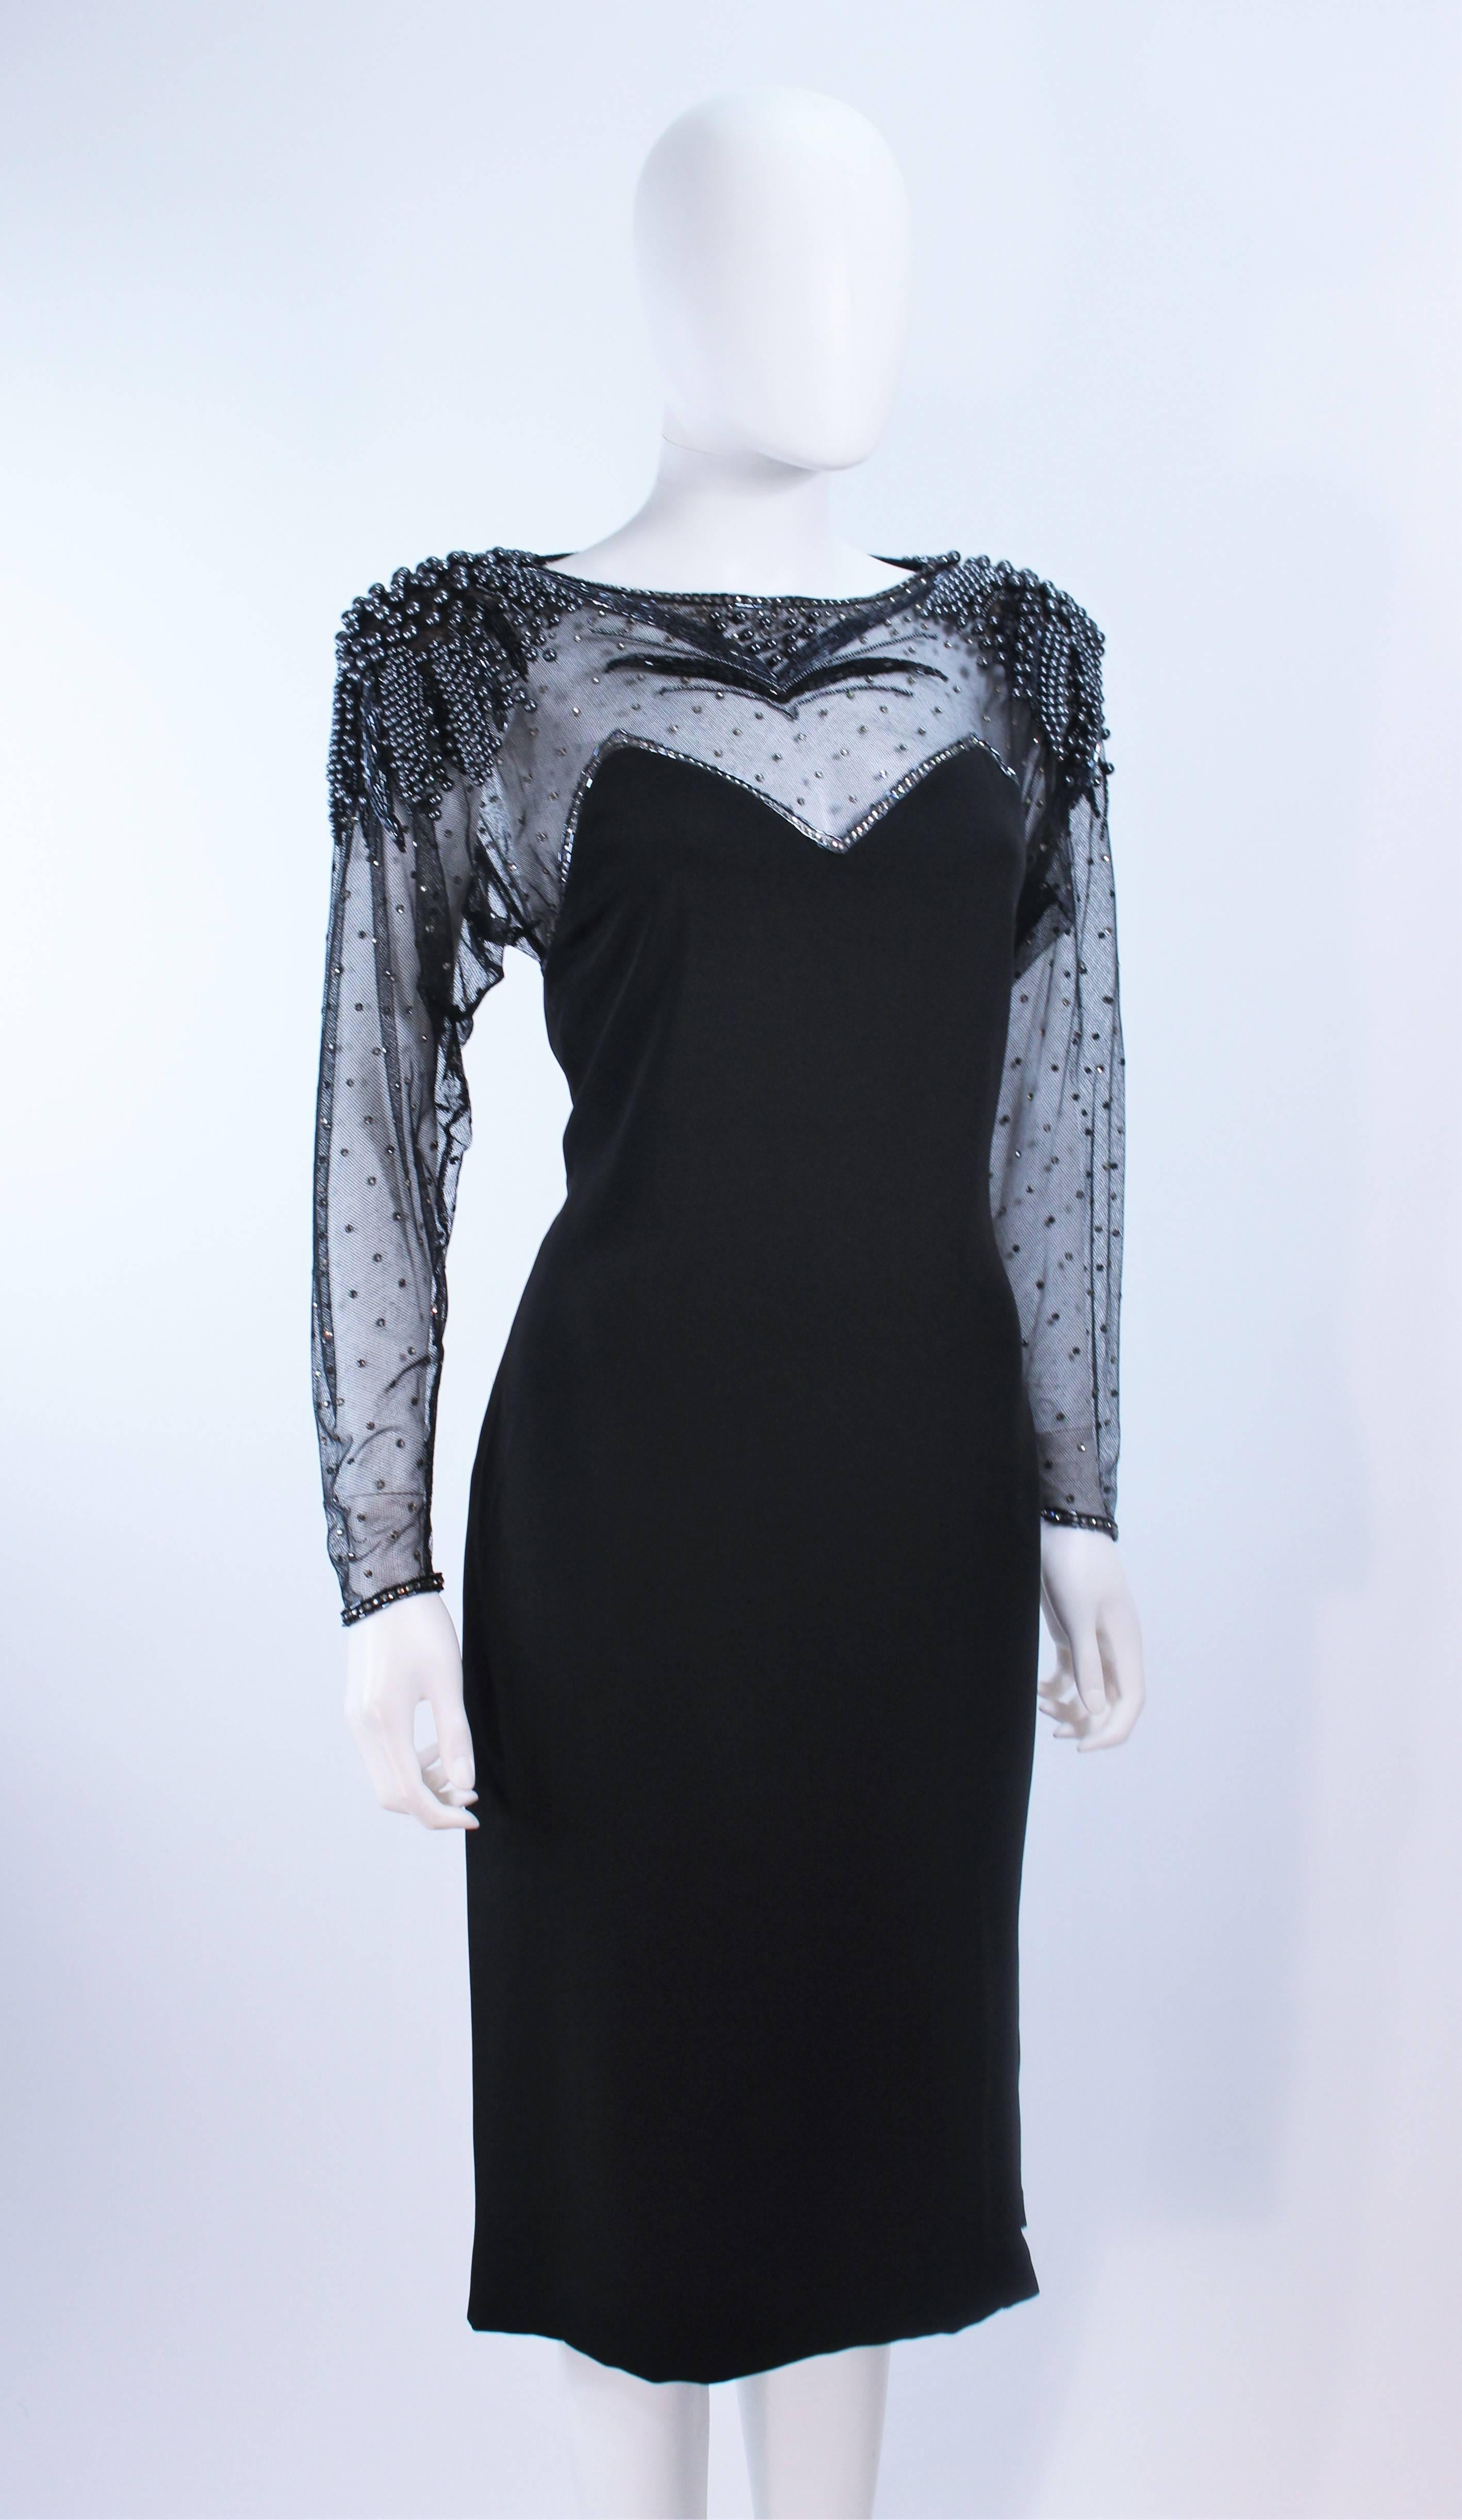 FRANK COMPOSTO Black Cocktail Dress with Sheer Beaded Sleeves Size 8 In Excellent Condition For Sale In Los Angeles, CA